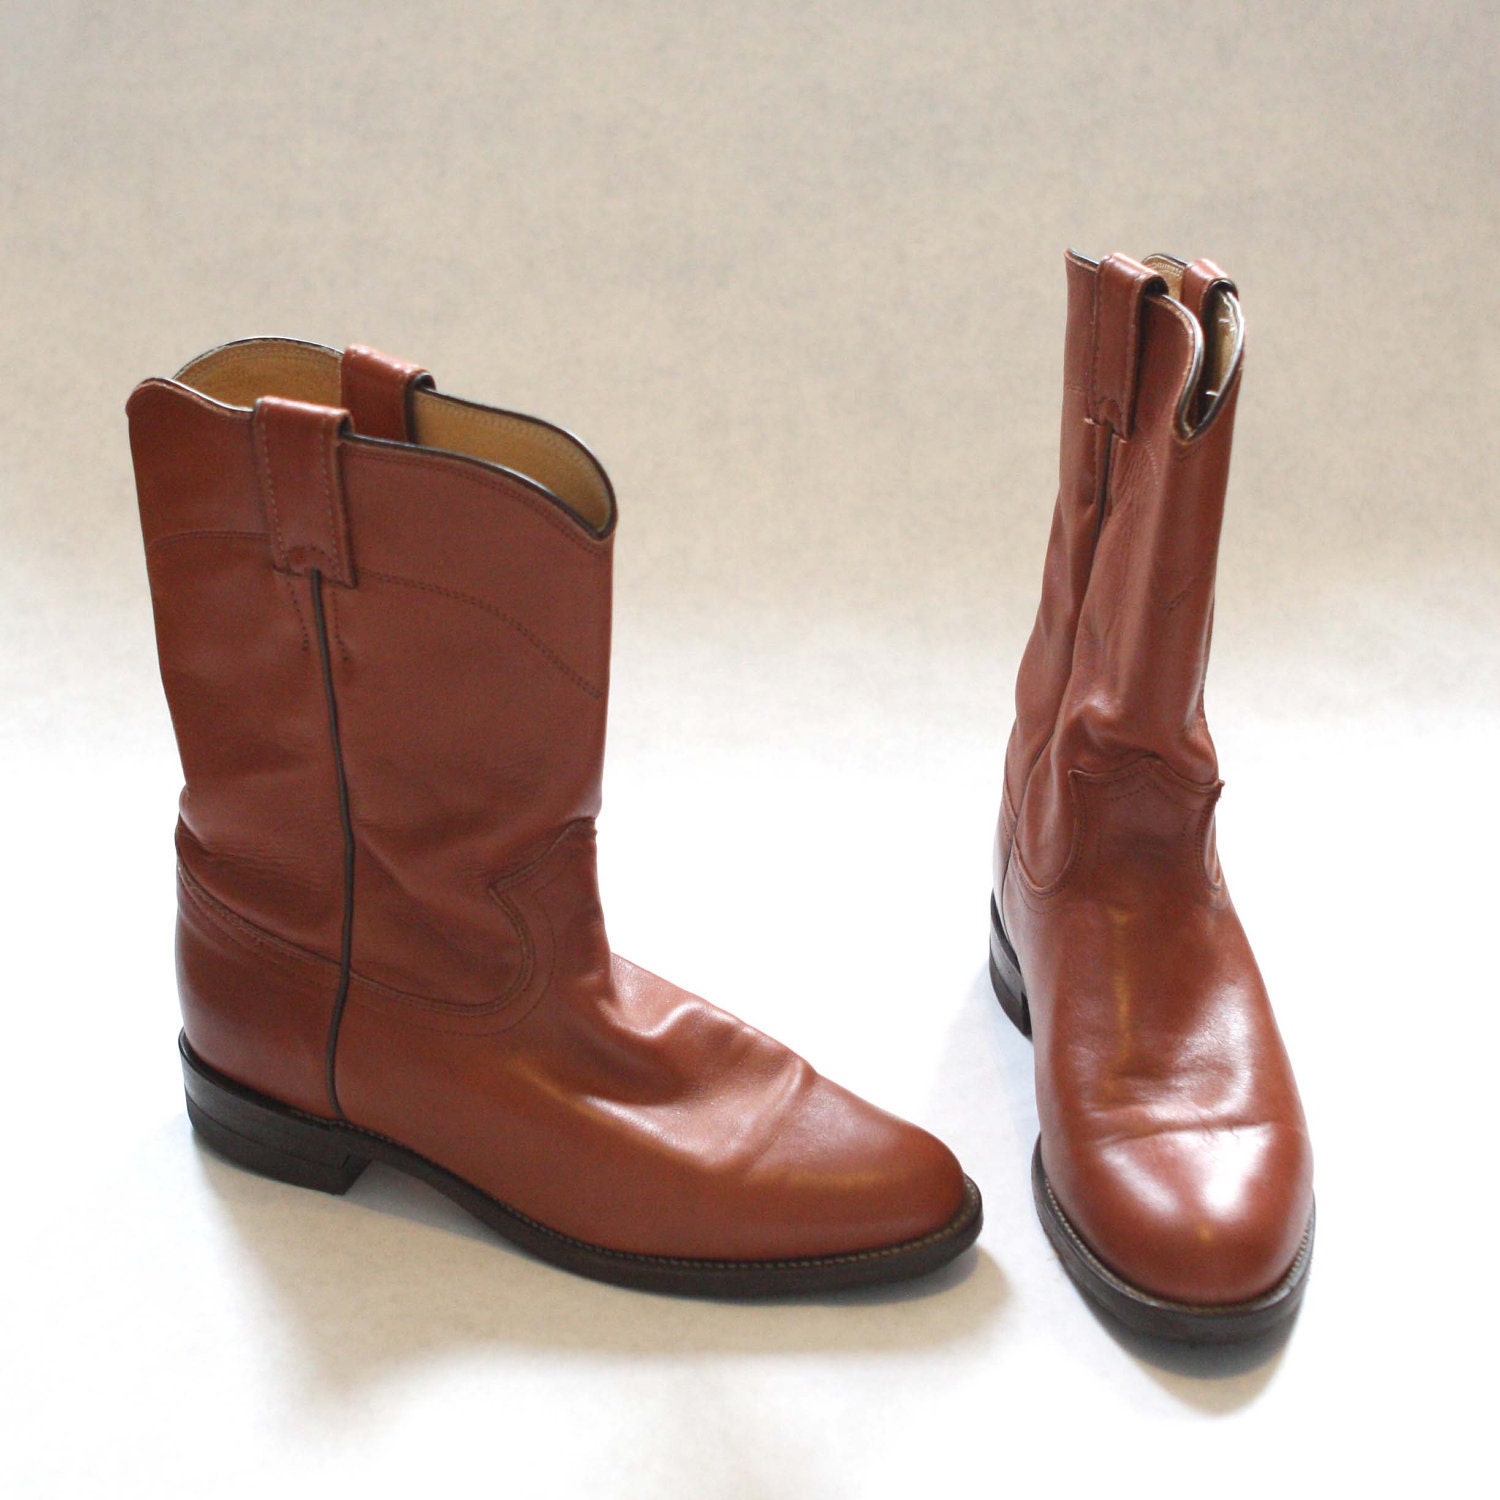 Boots Brown Justin Boots Mens 8 Womens 9 or 9.5  Mid Calf Leather Like New Condition - persnicketyvintage